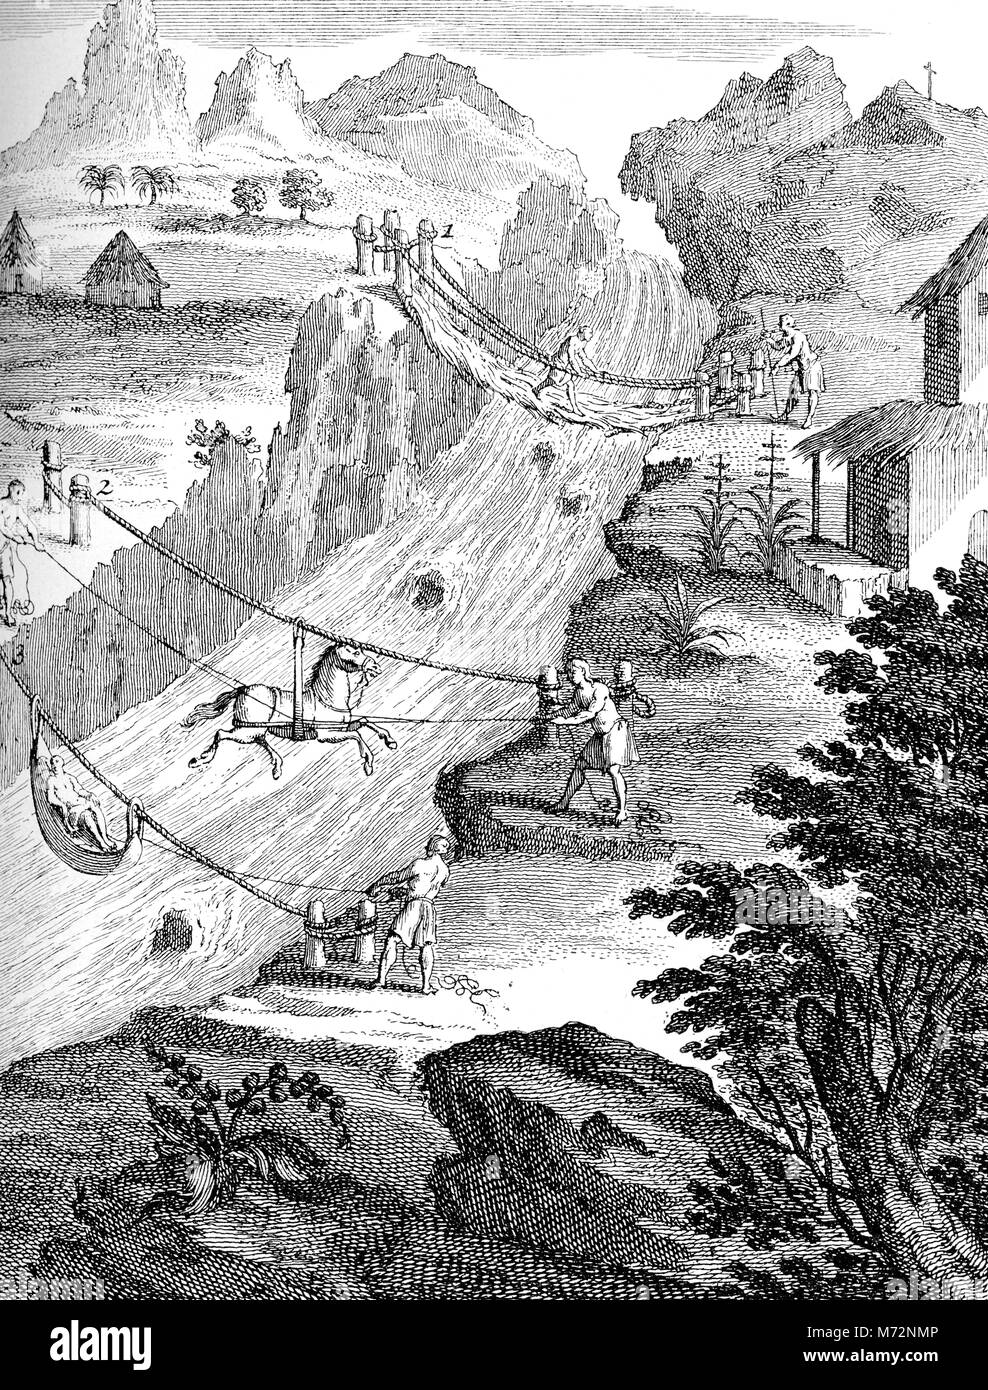 Year 1751 engraving, usual means of transport in South America to cross rivers in Andes region with grass braided cables Stock Photo